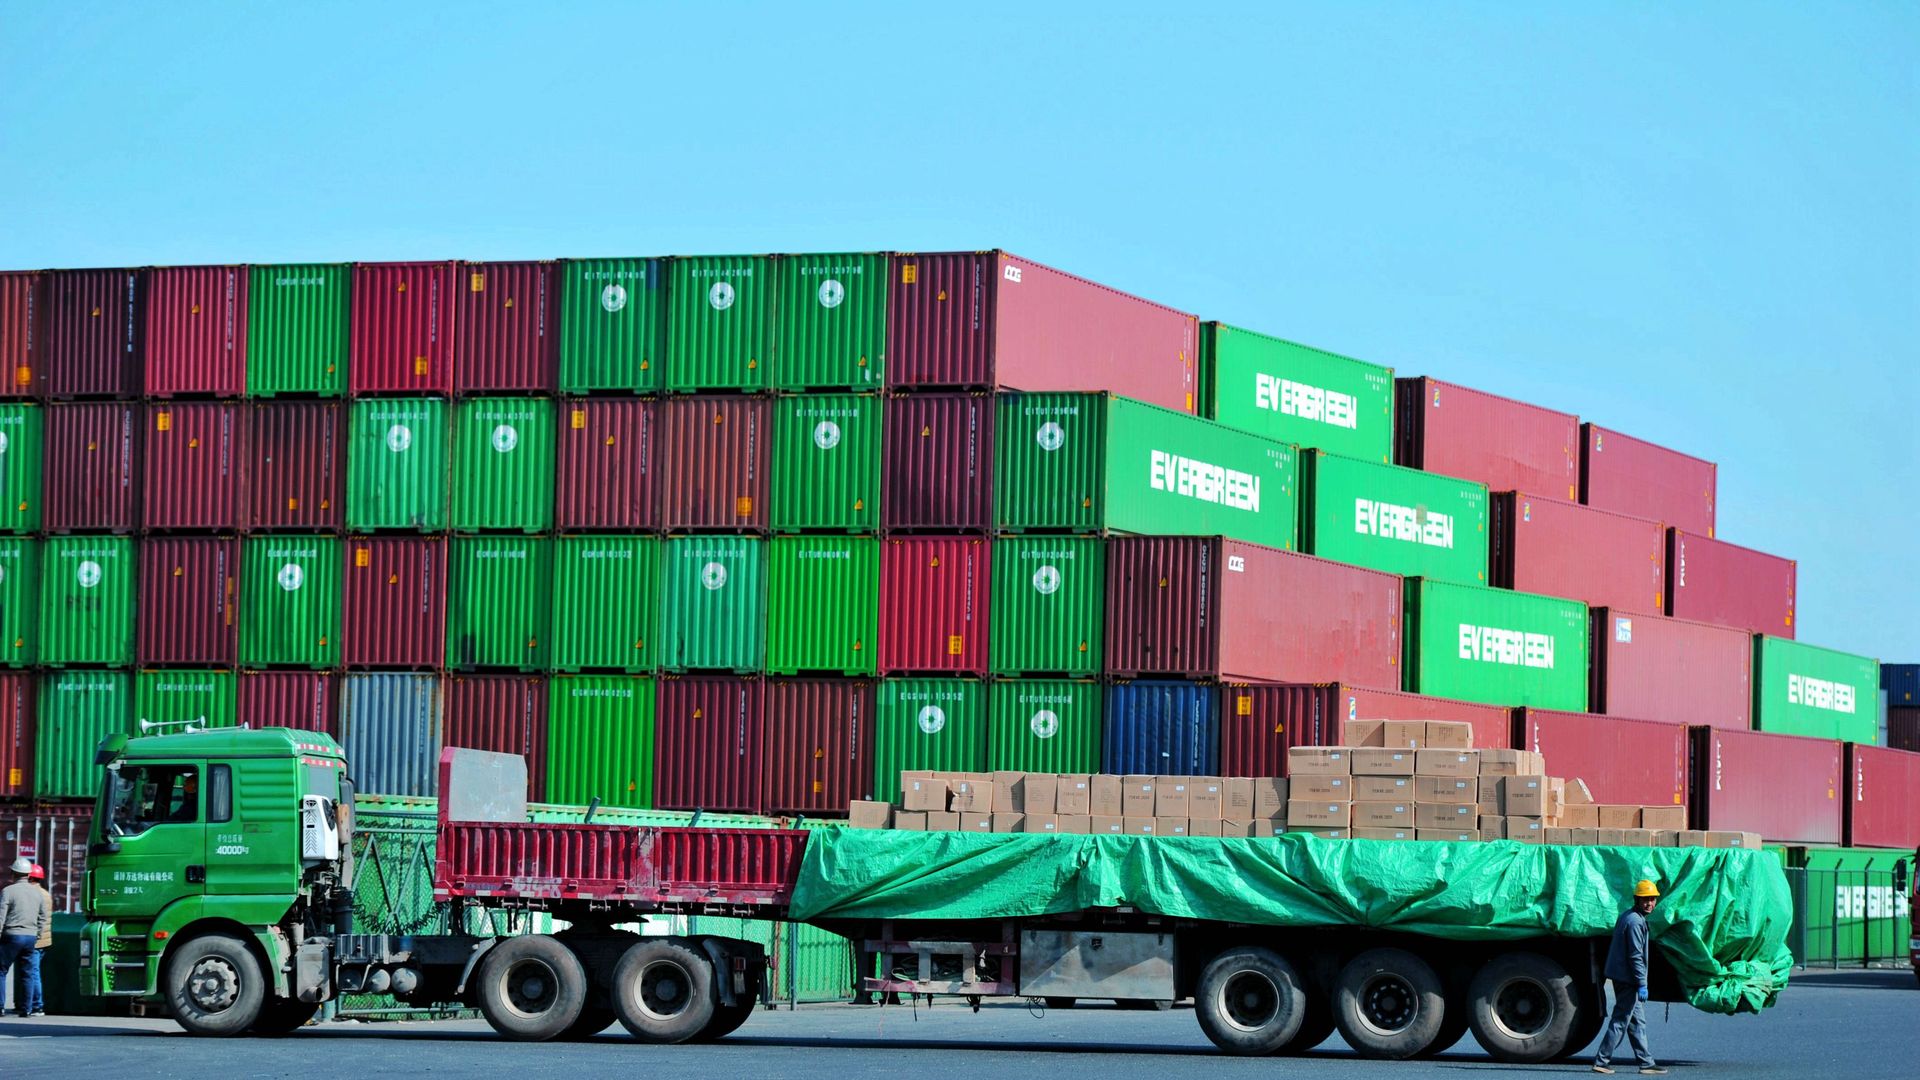 A distribution company outside the container port in Qingdao in east China's Shandong province.